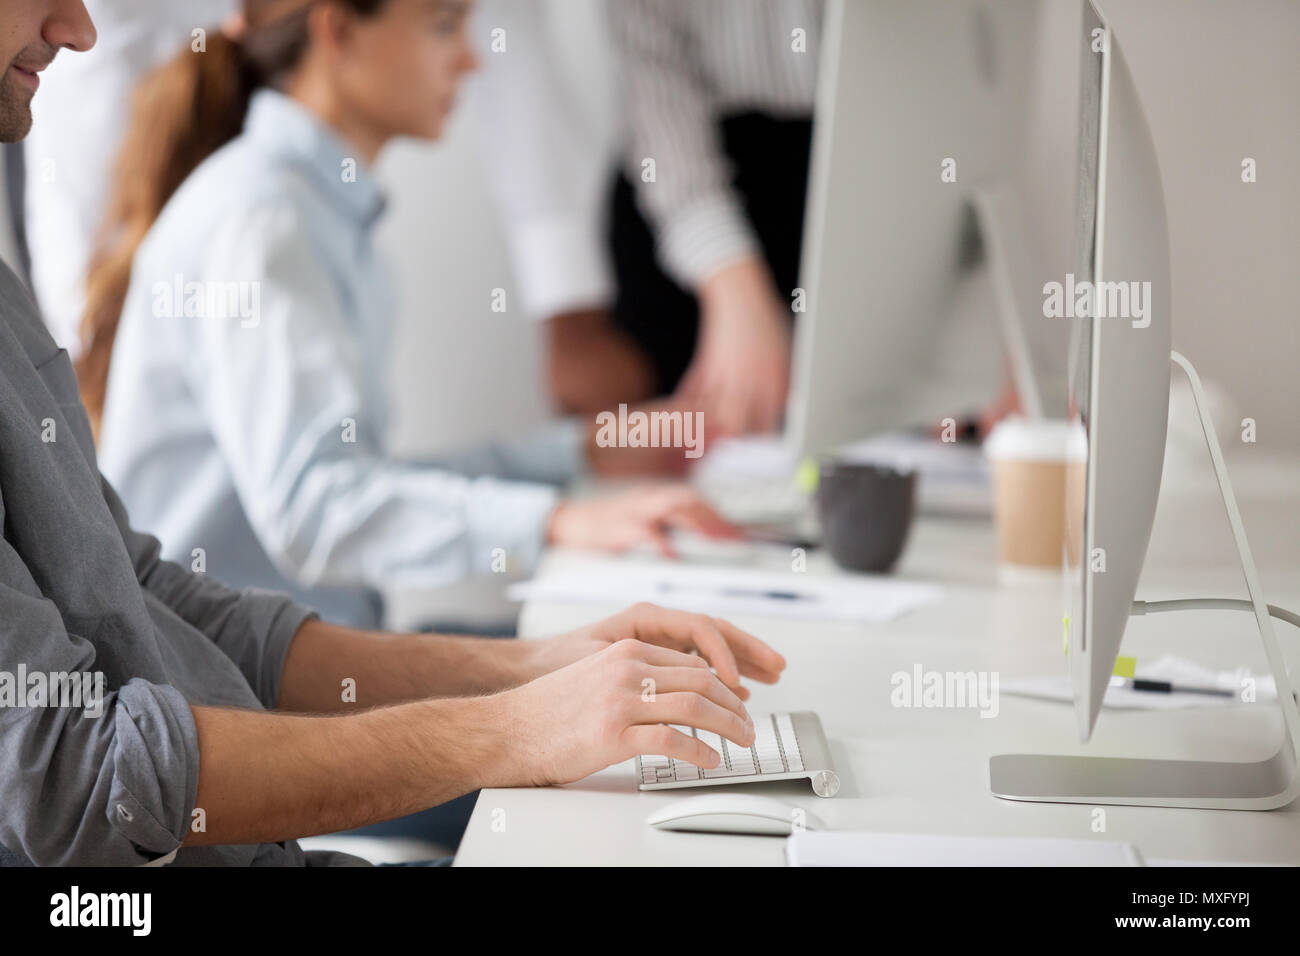 Male employee writing emails to corporate client at computer Stock Photo